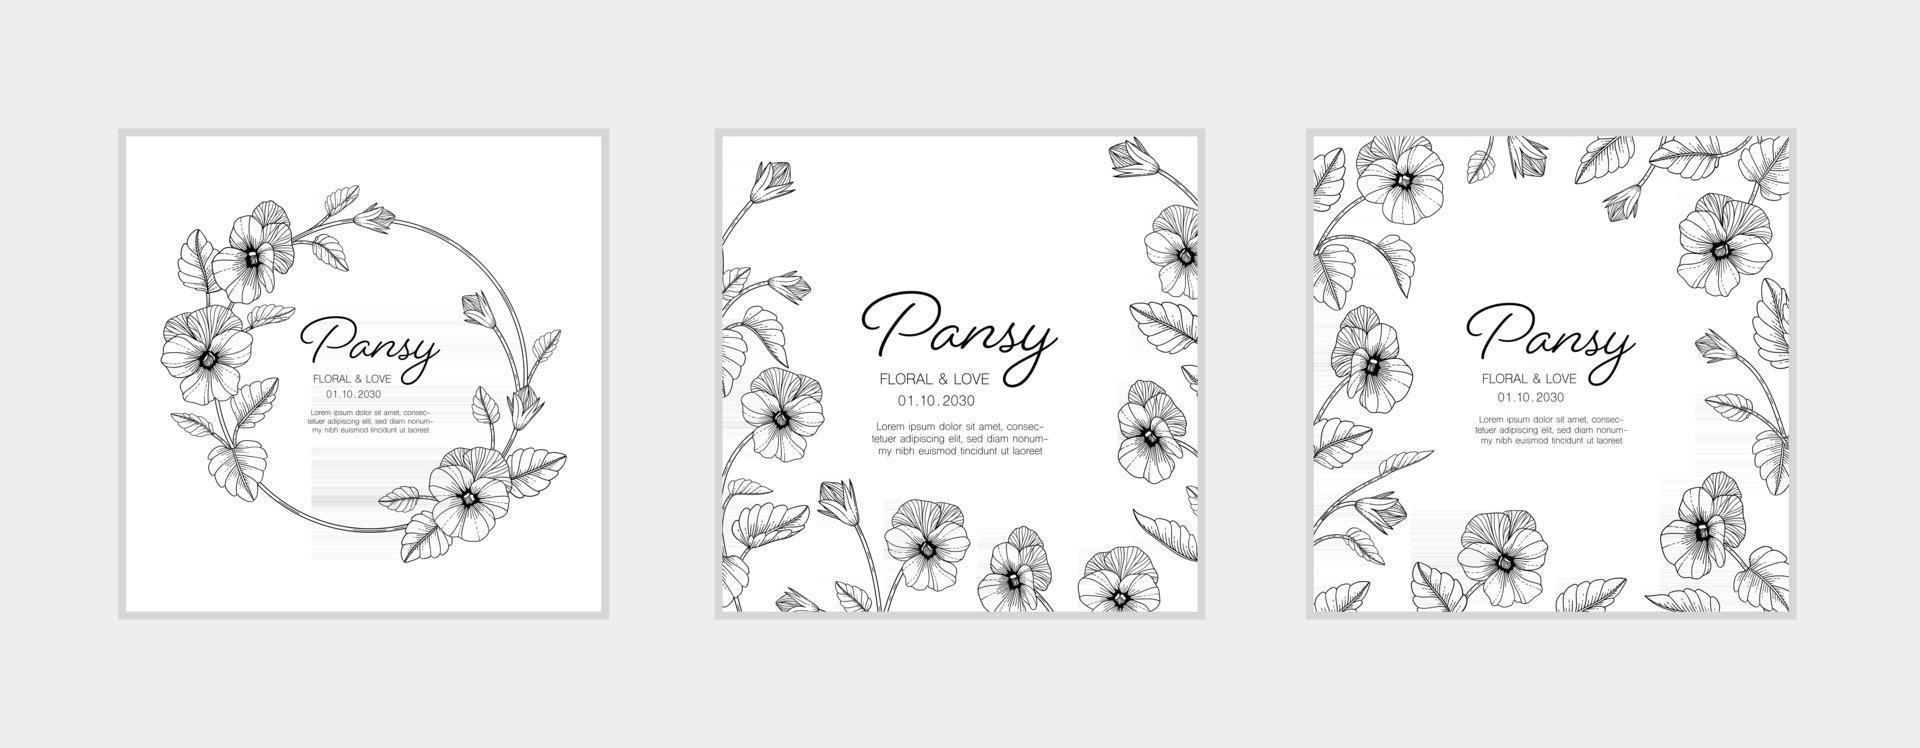 Hand drawn pansy floral greeting card background. vector